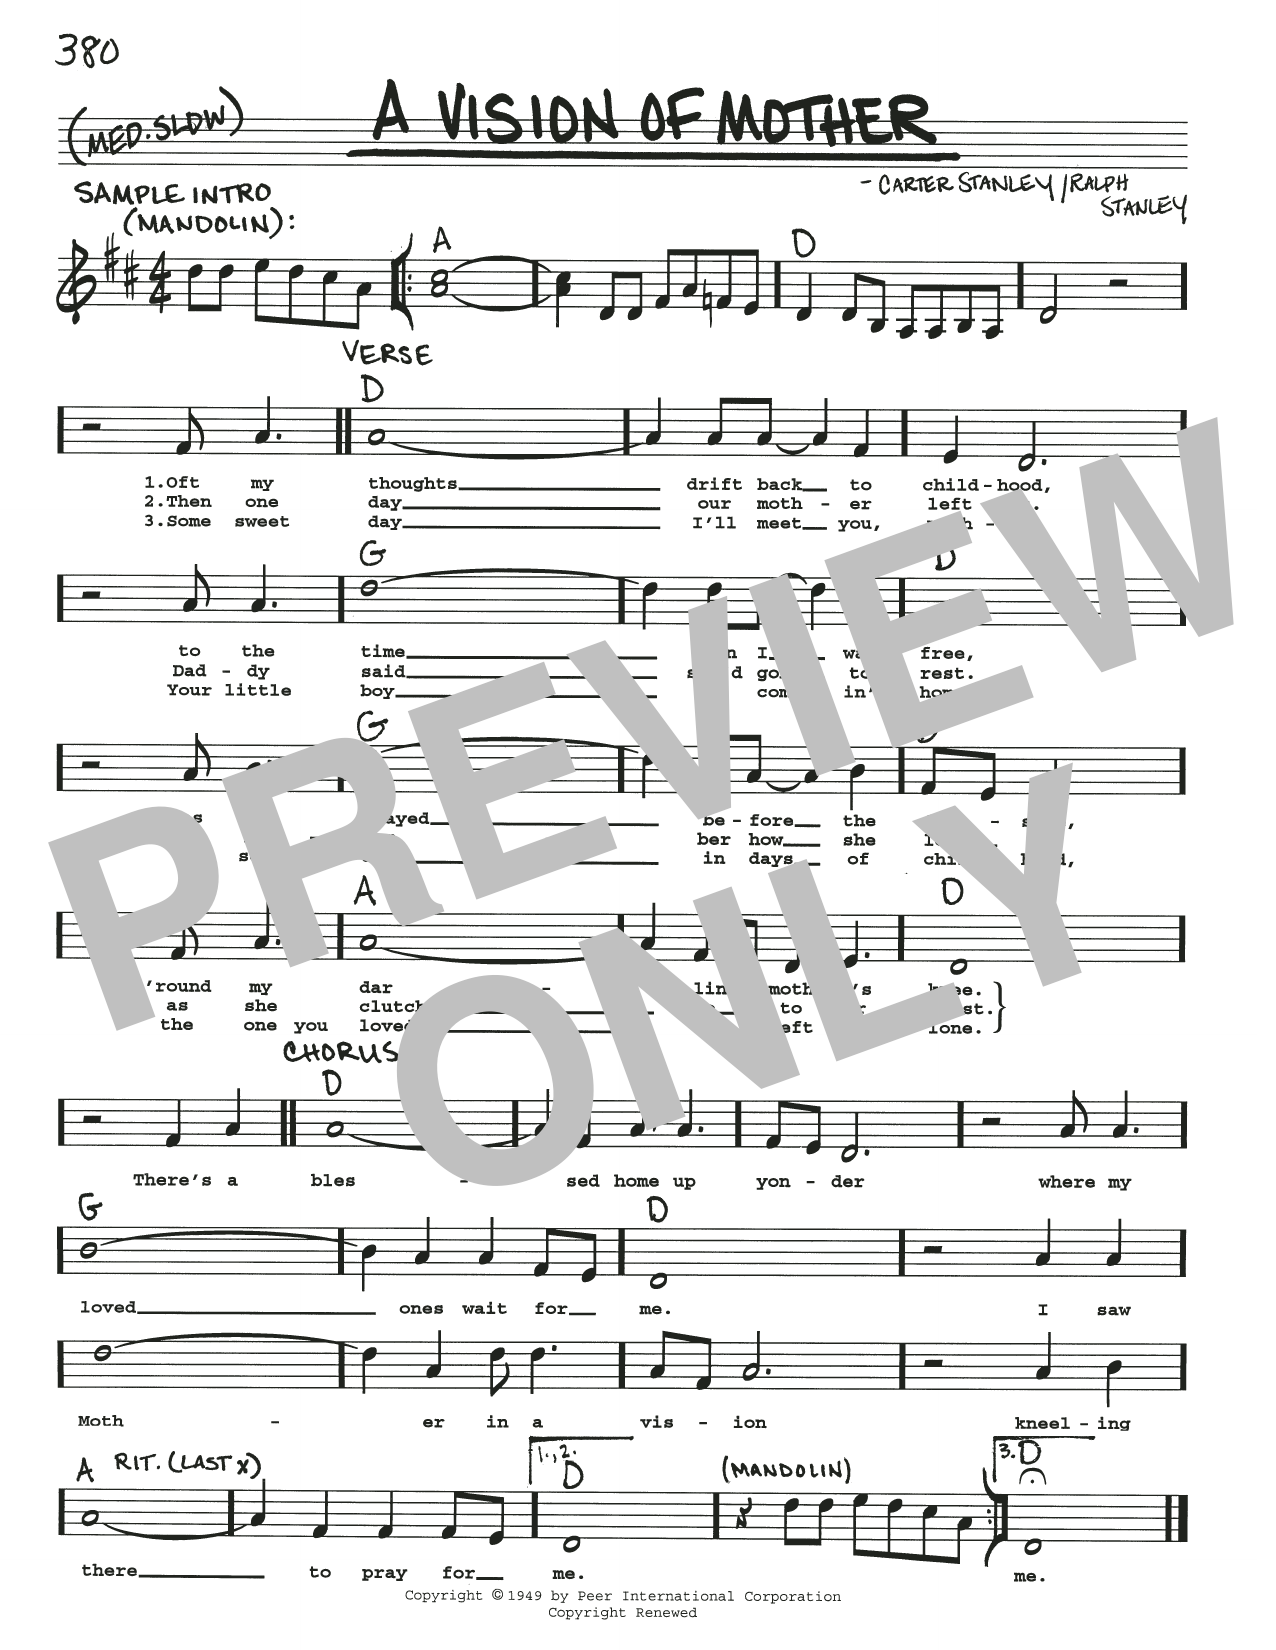 Download Carter Stanley A Vision Of Mother Sheet Music